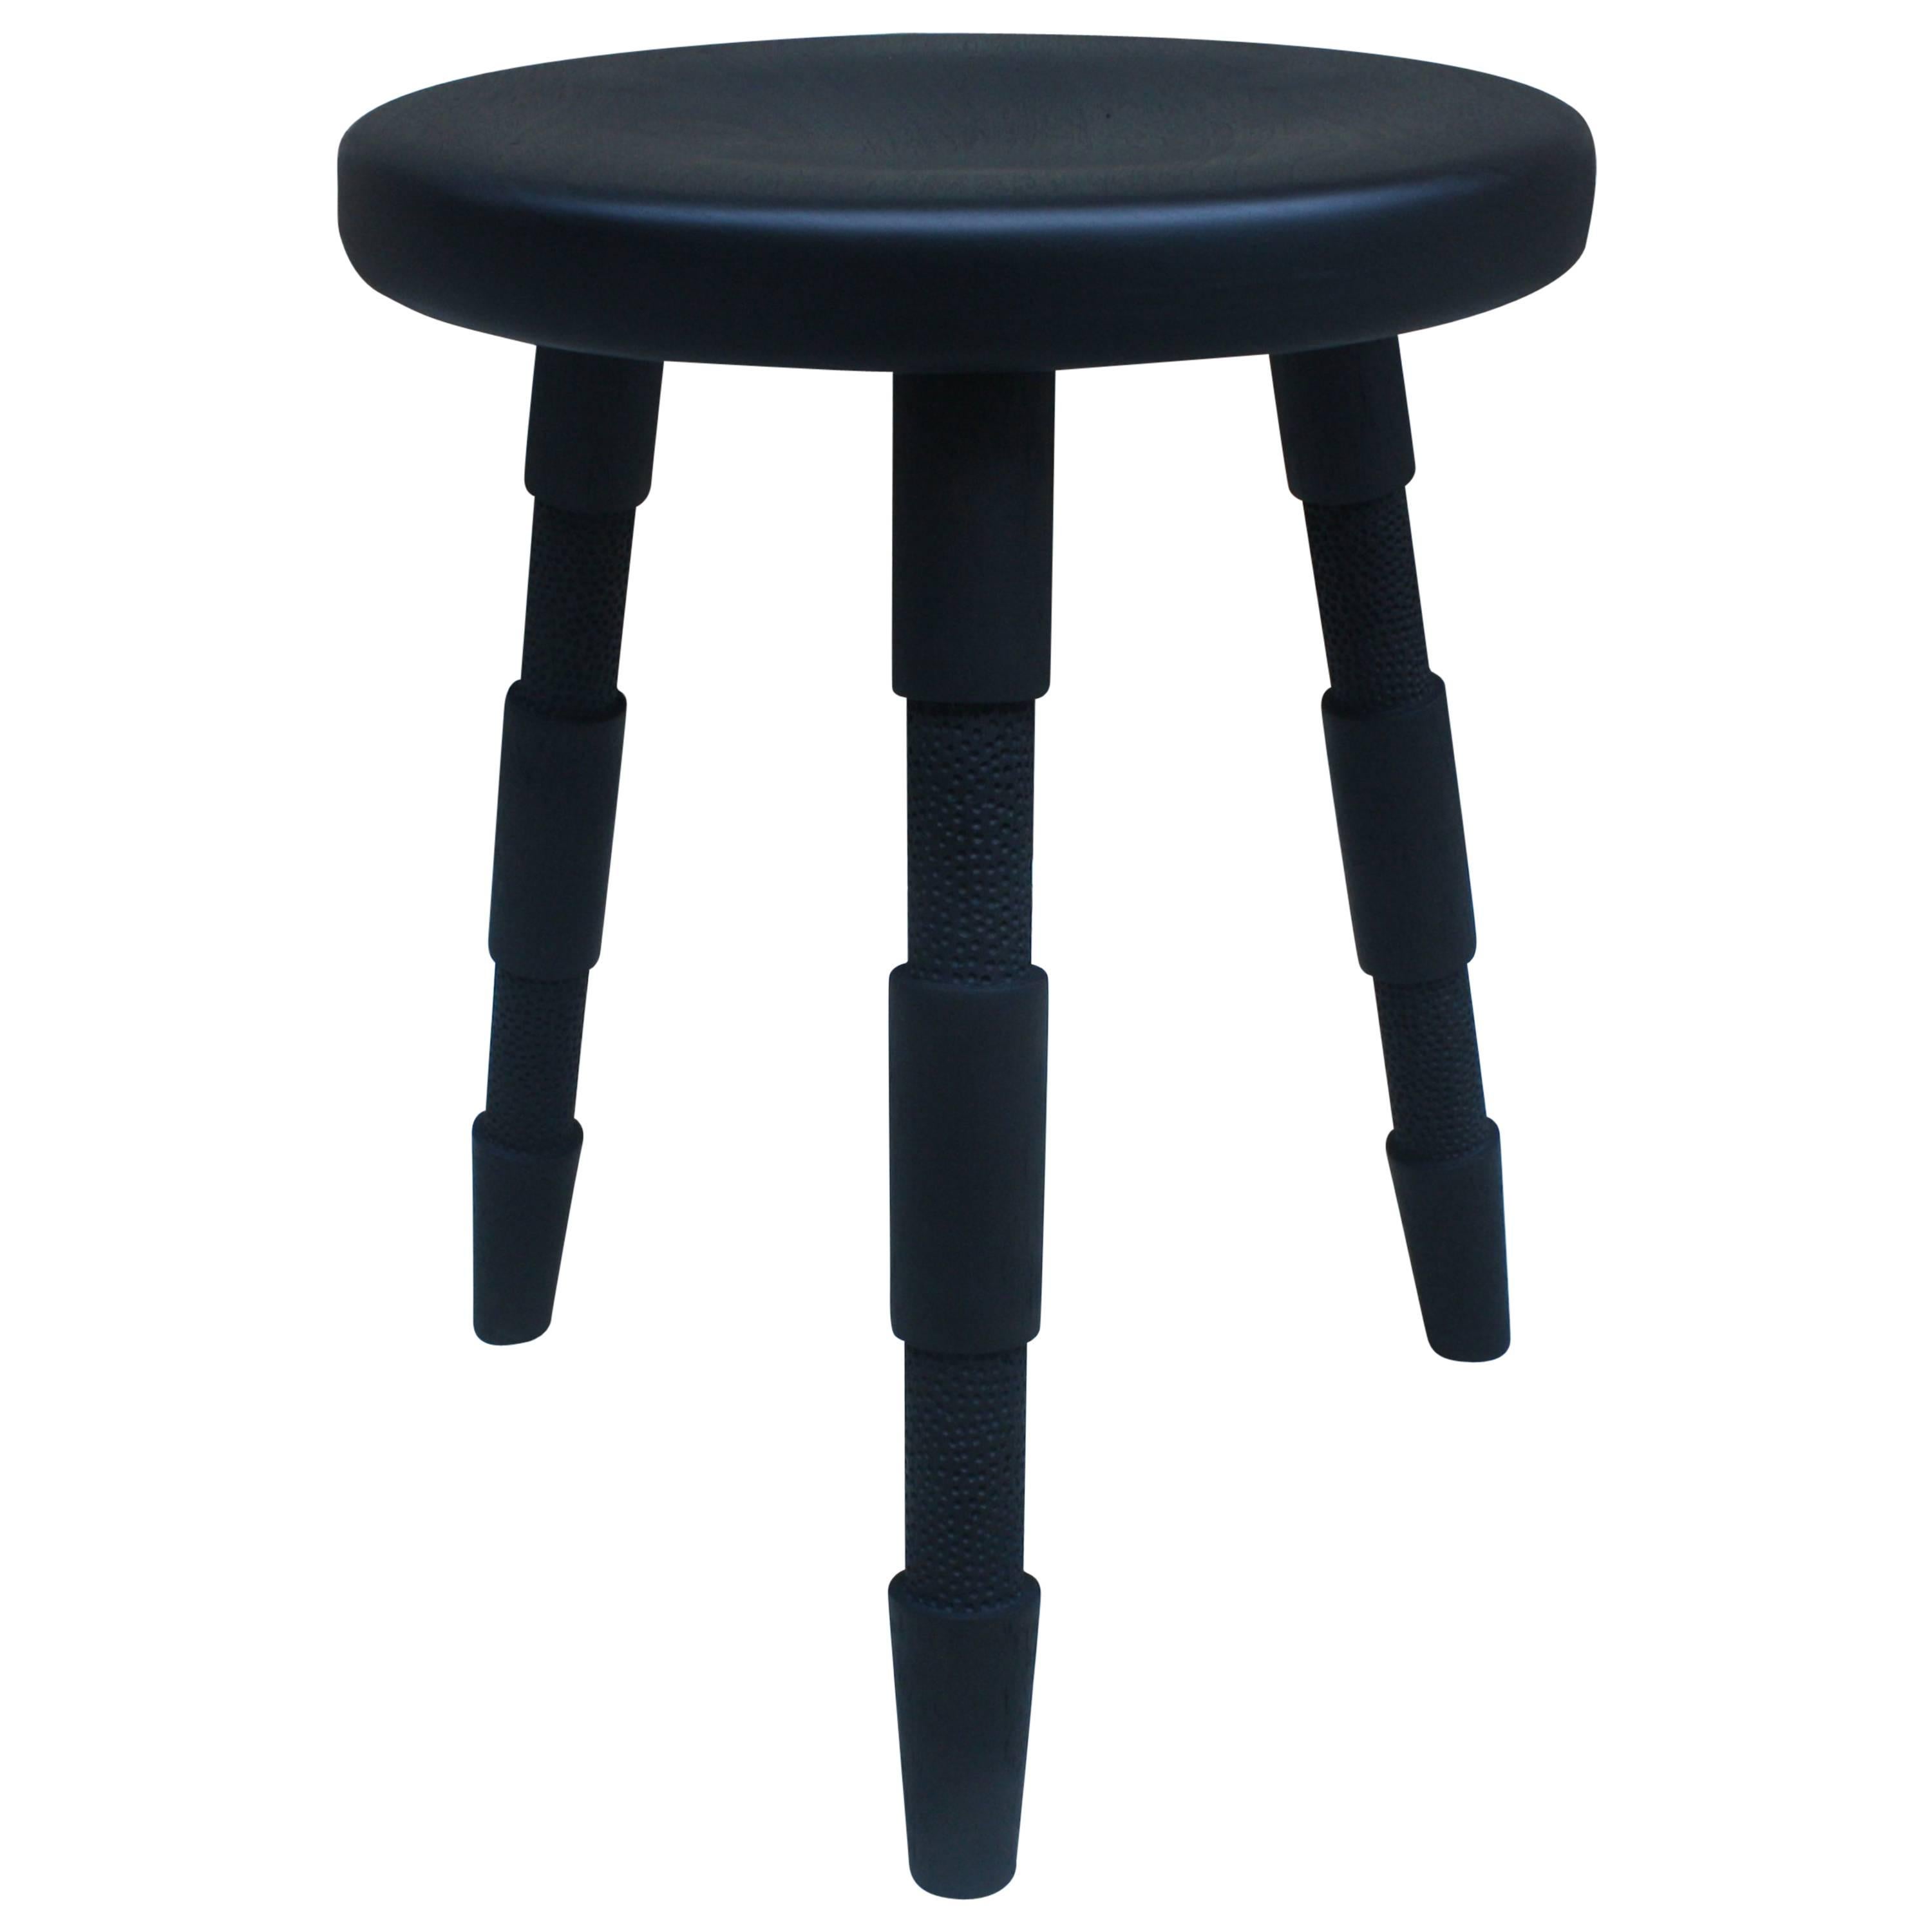 Saddle, Handmade Wood Stool with Textured Legs and a Carved Seat For Sale